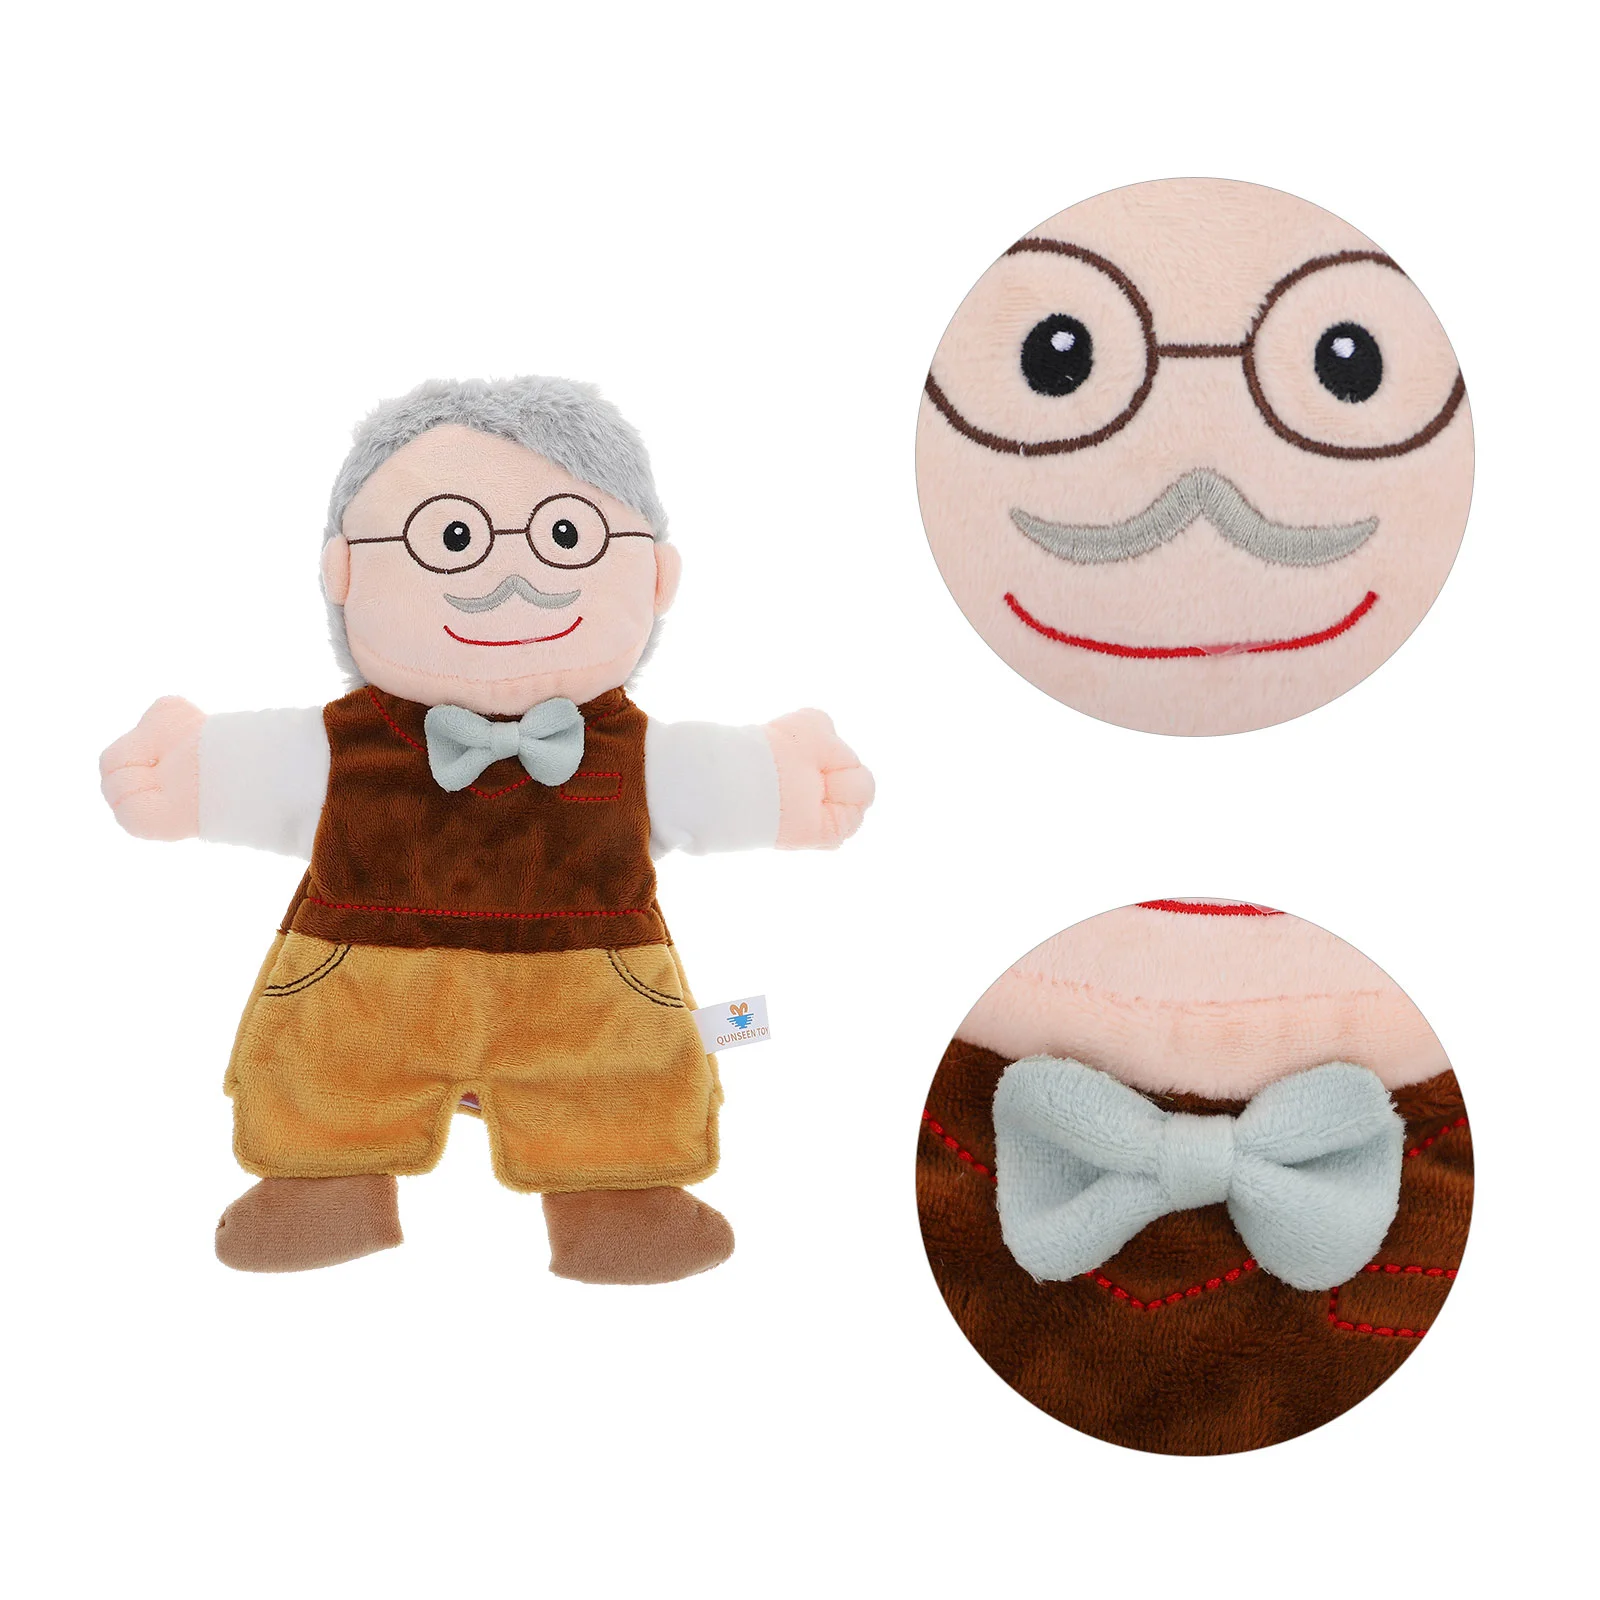 

Hand Puppet Puppets Family Toyfinger Kids Toys Plush Plaything Animal Membersplay Role Interactive Grandpa Storytelling Story